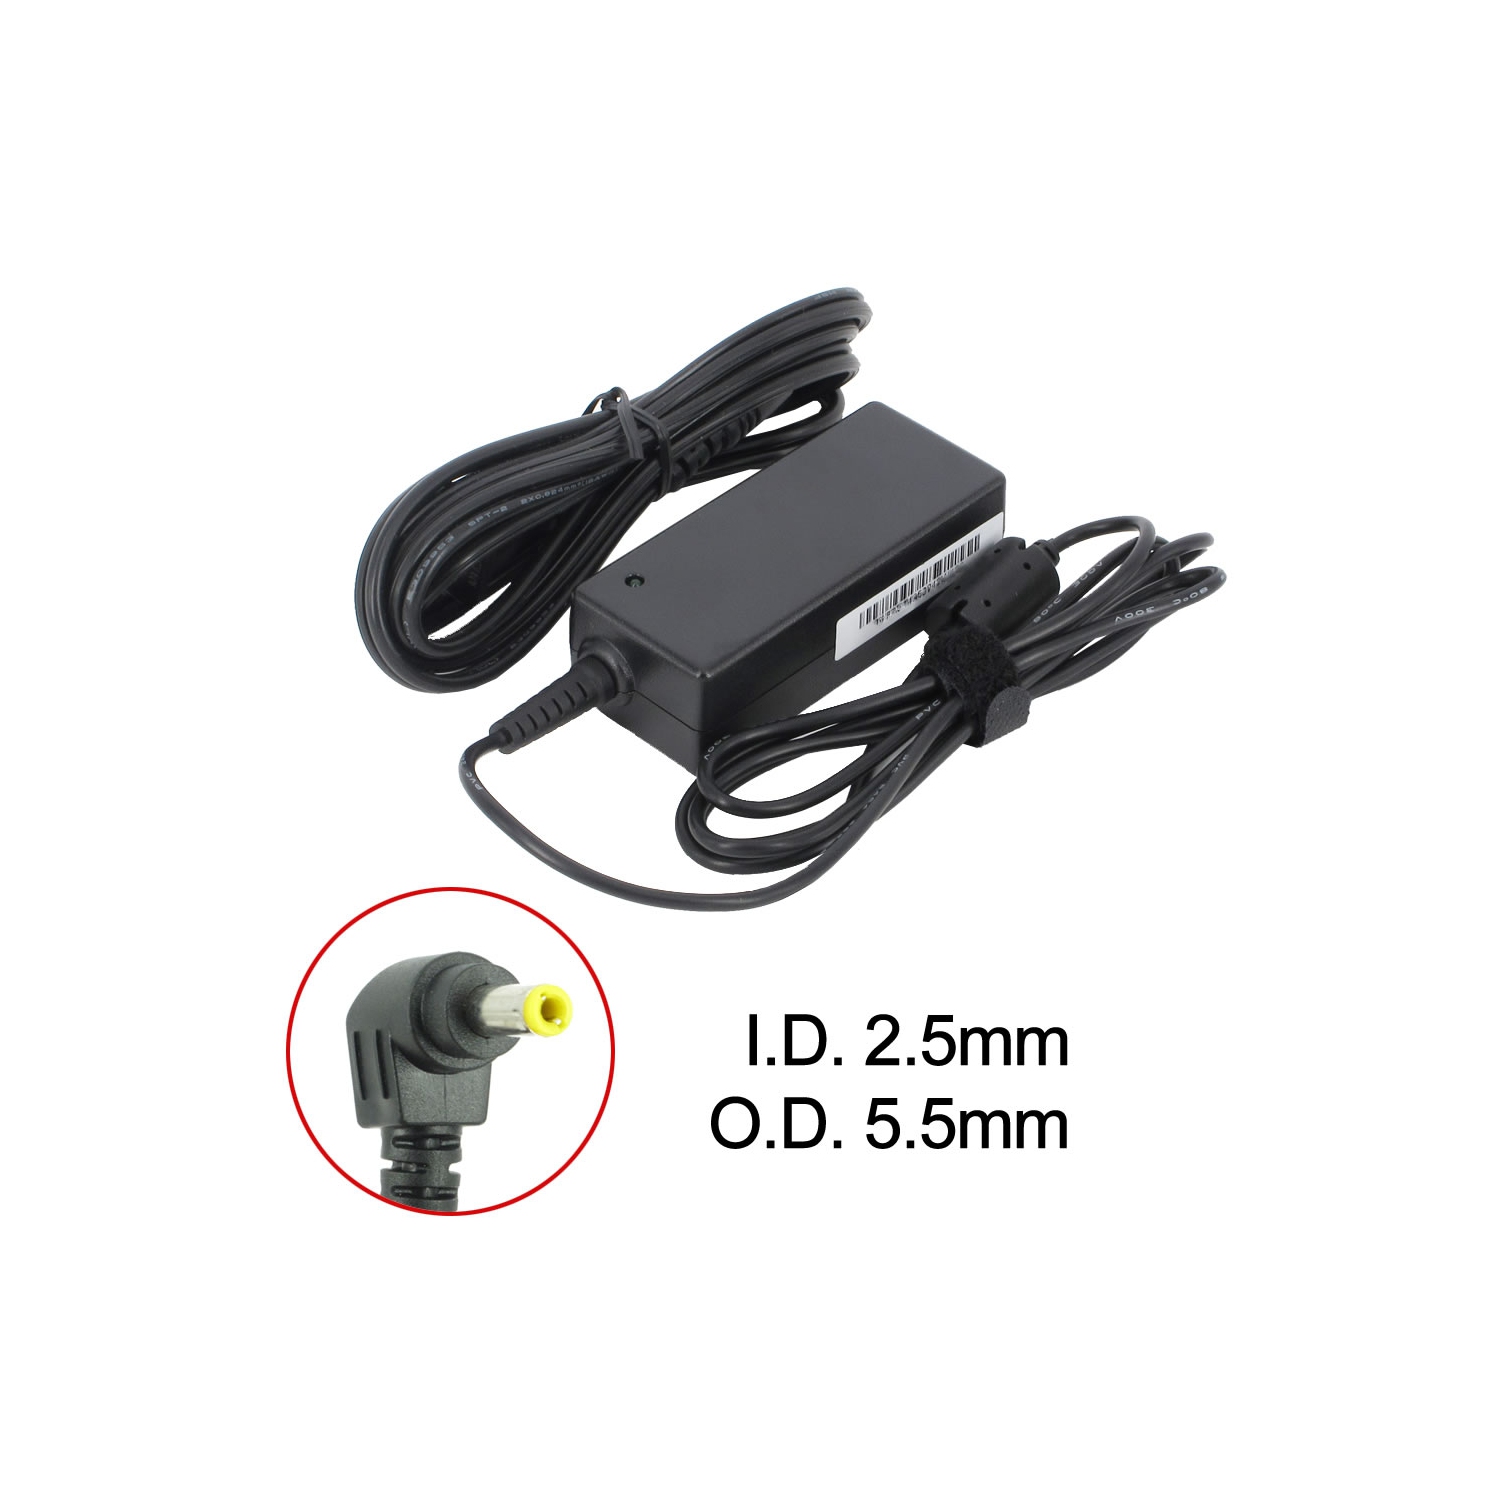 BattDepot: New Laptop AC Adapter for Lenovo Ideapad S205S, 31036033, 31038049, 41R4451, 45K2206, 55Y9370, 57Y6375